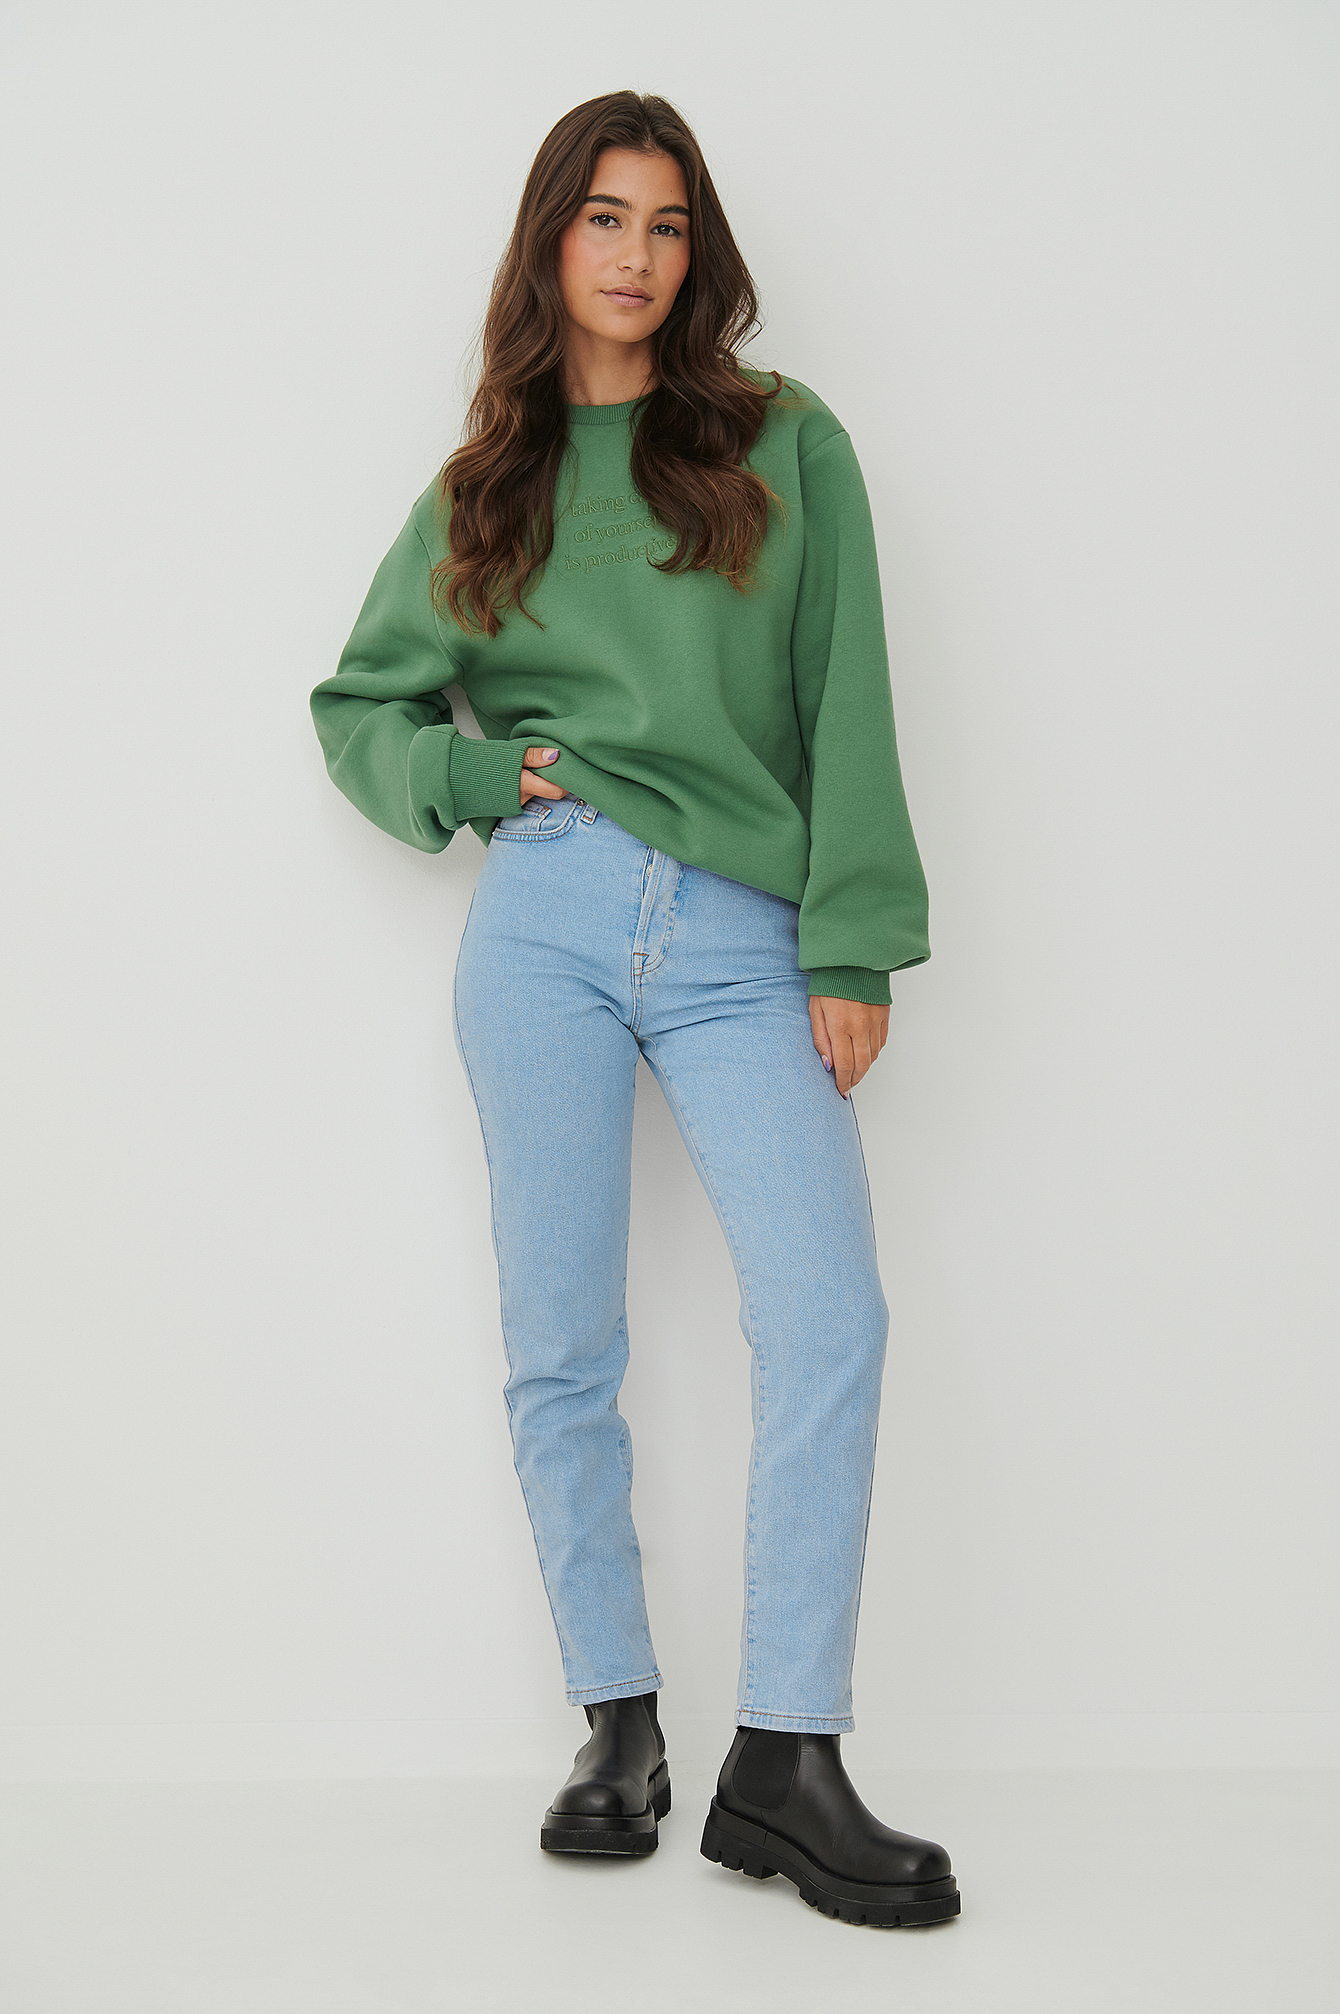 Quote Embroidery Oversized Sweater Outfit.